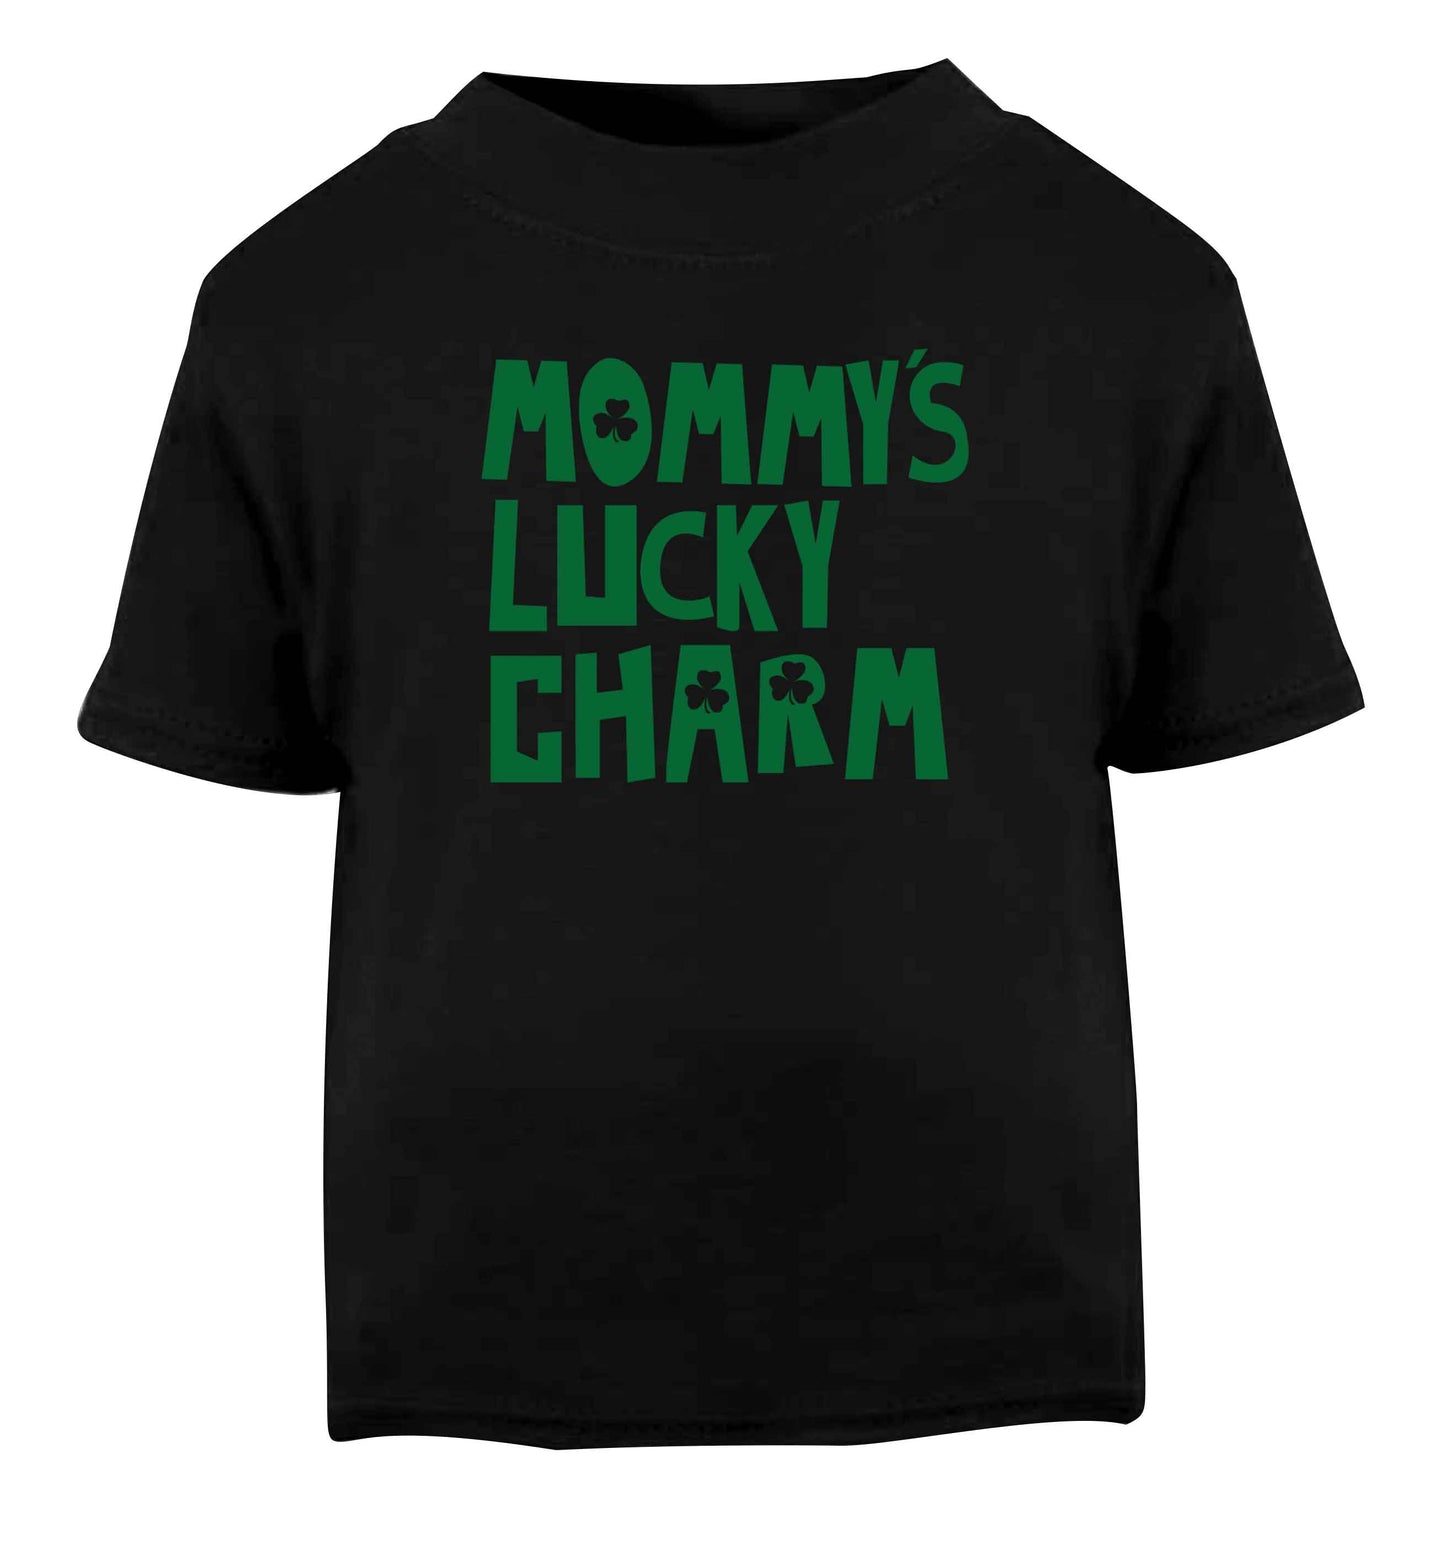 Mommy's lucky charm Black baby toddler Tshirt 2 years